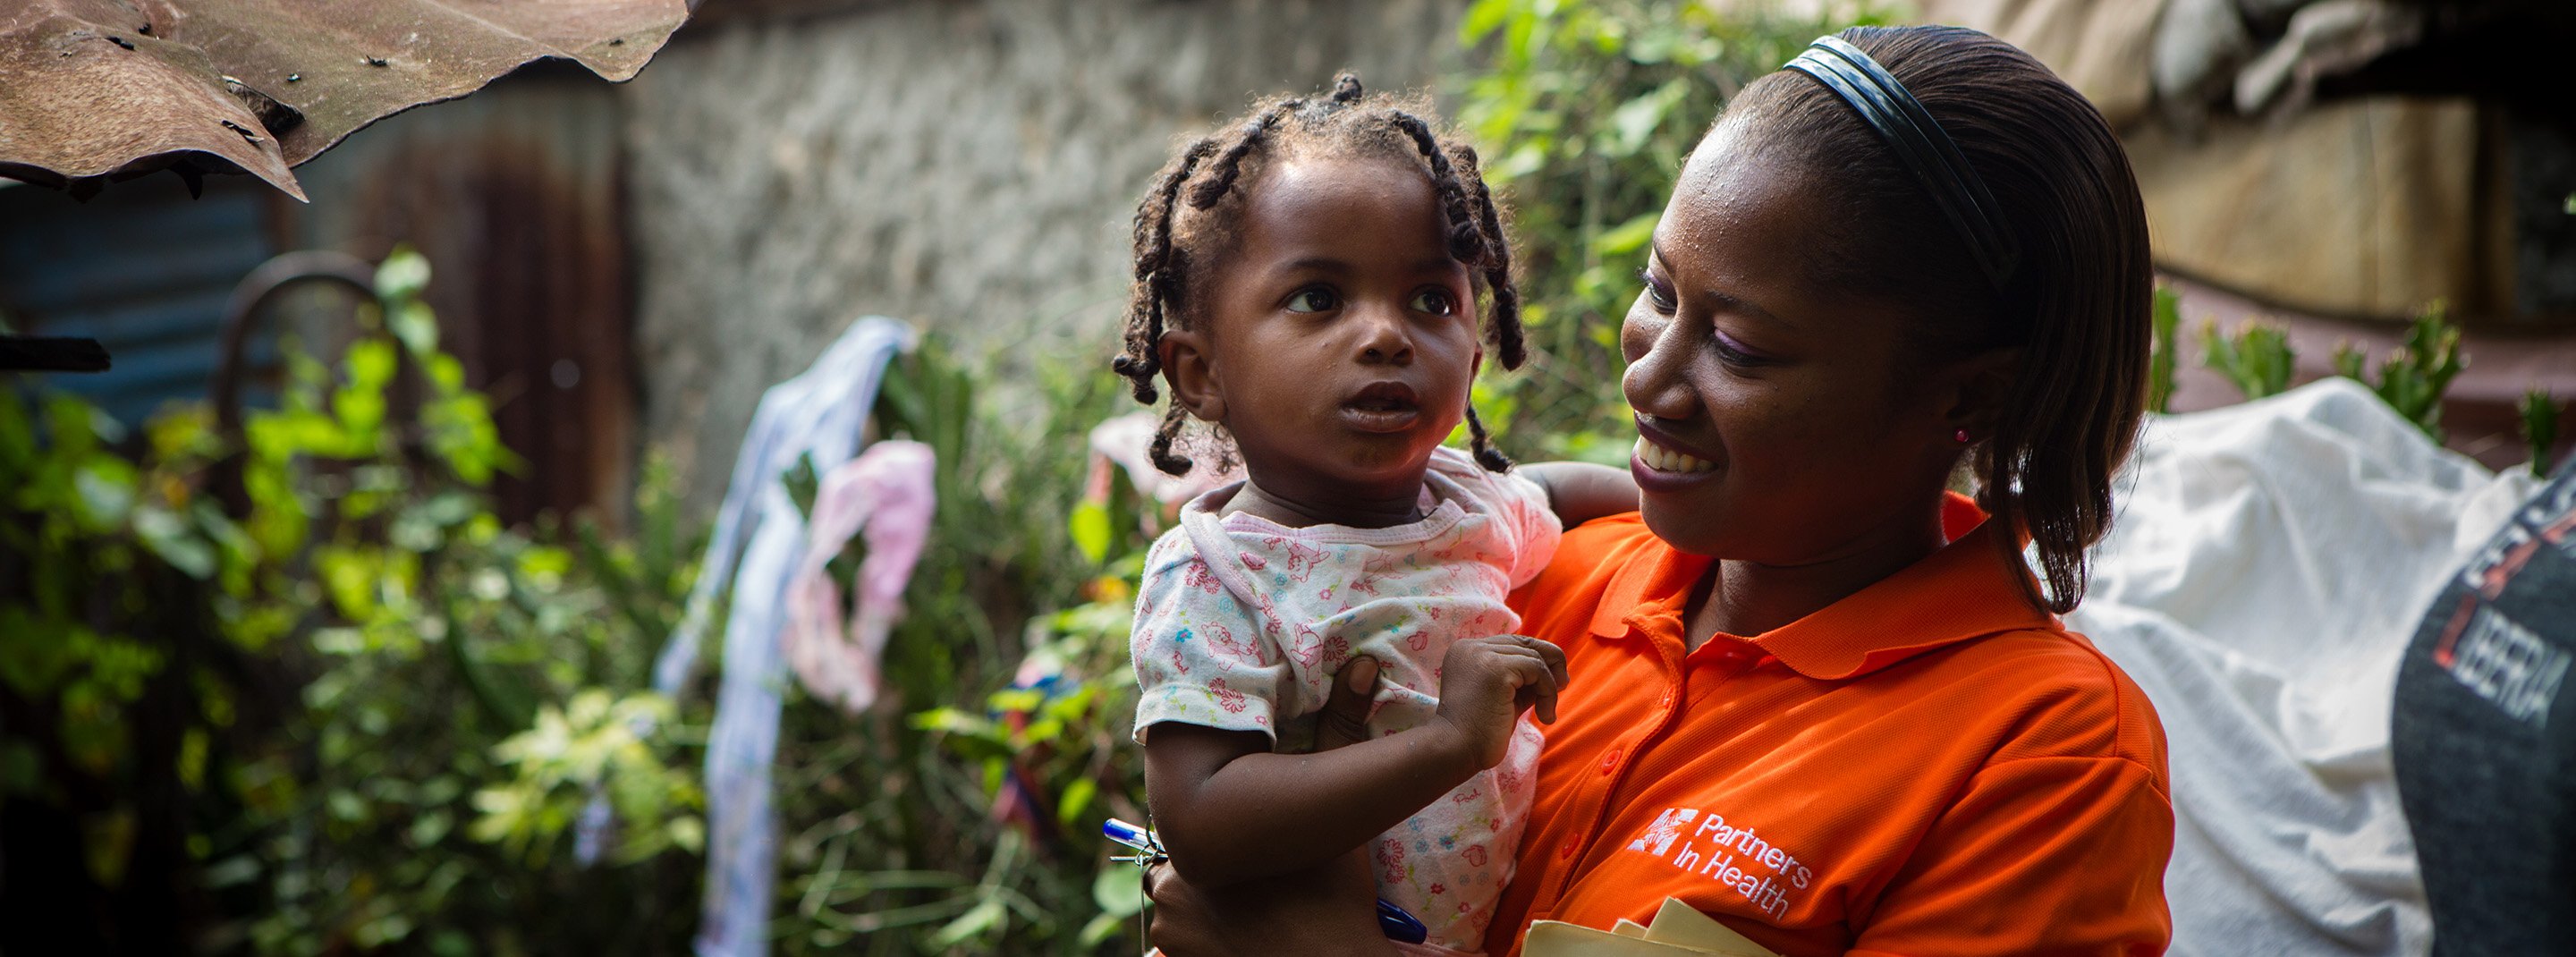 A PIH worker cheerily carries a toddler during a home visit.